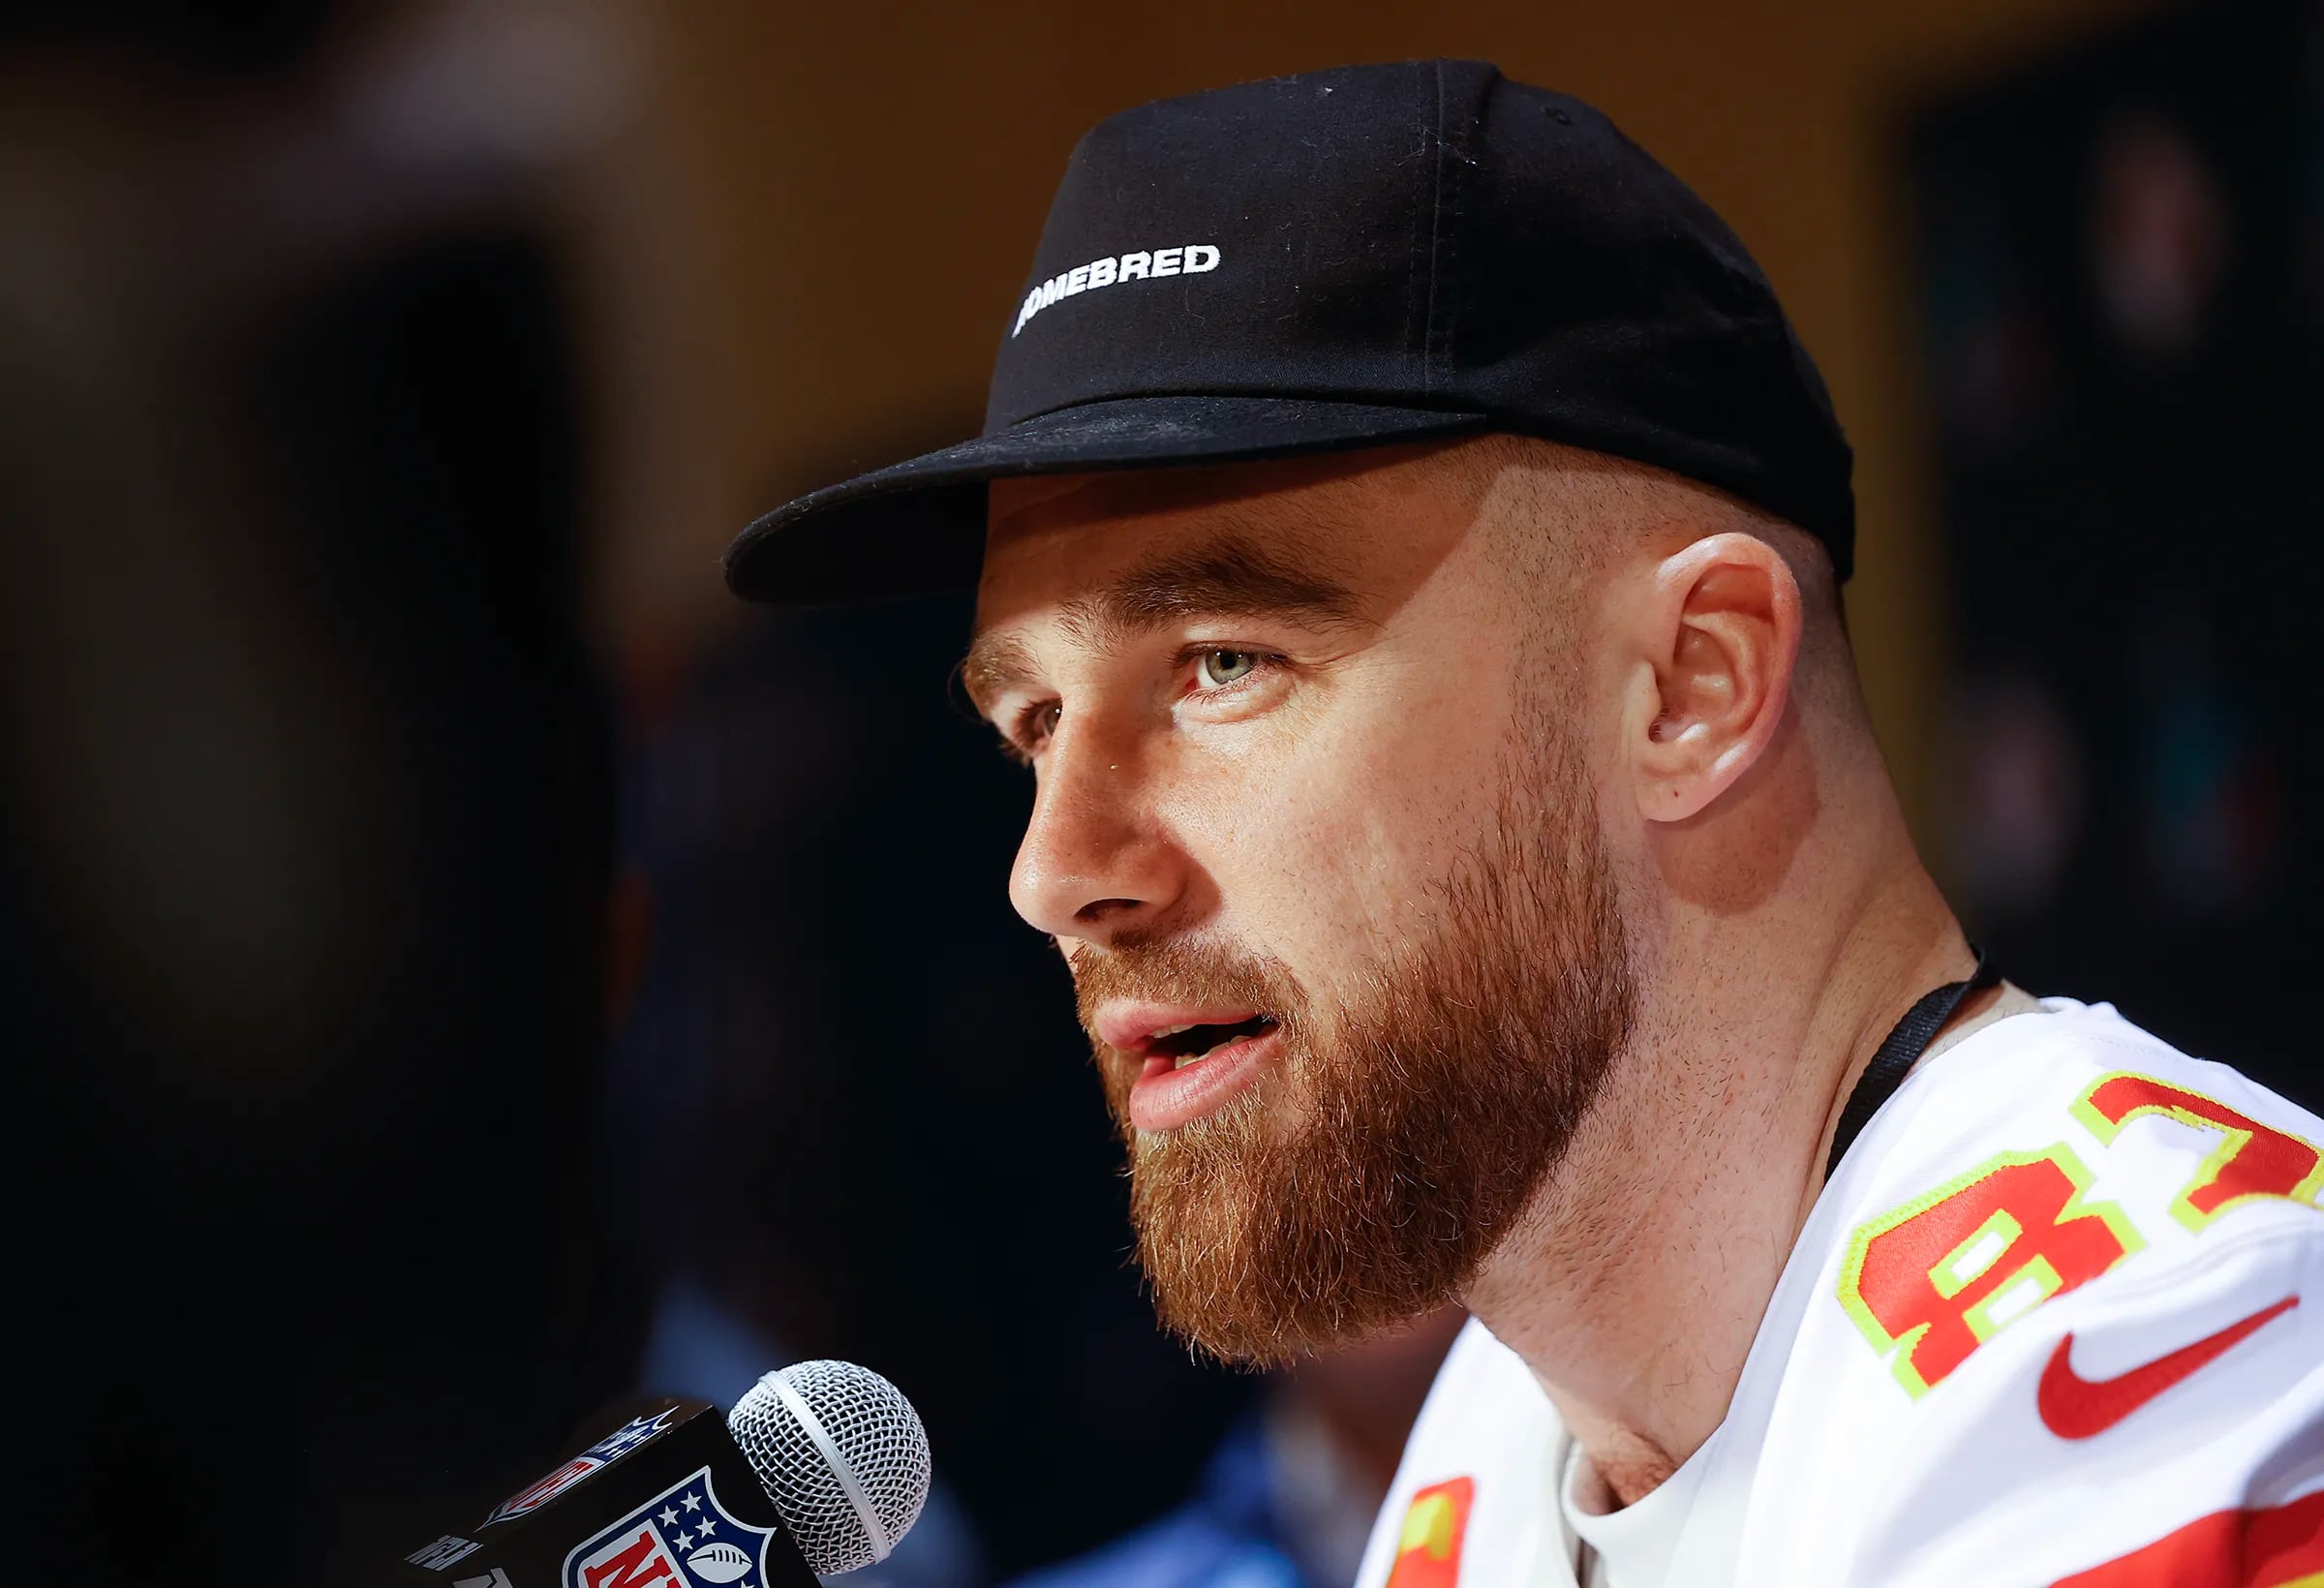 Chiefs star Travis Kelce out after injuring himself in practice this week. 